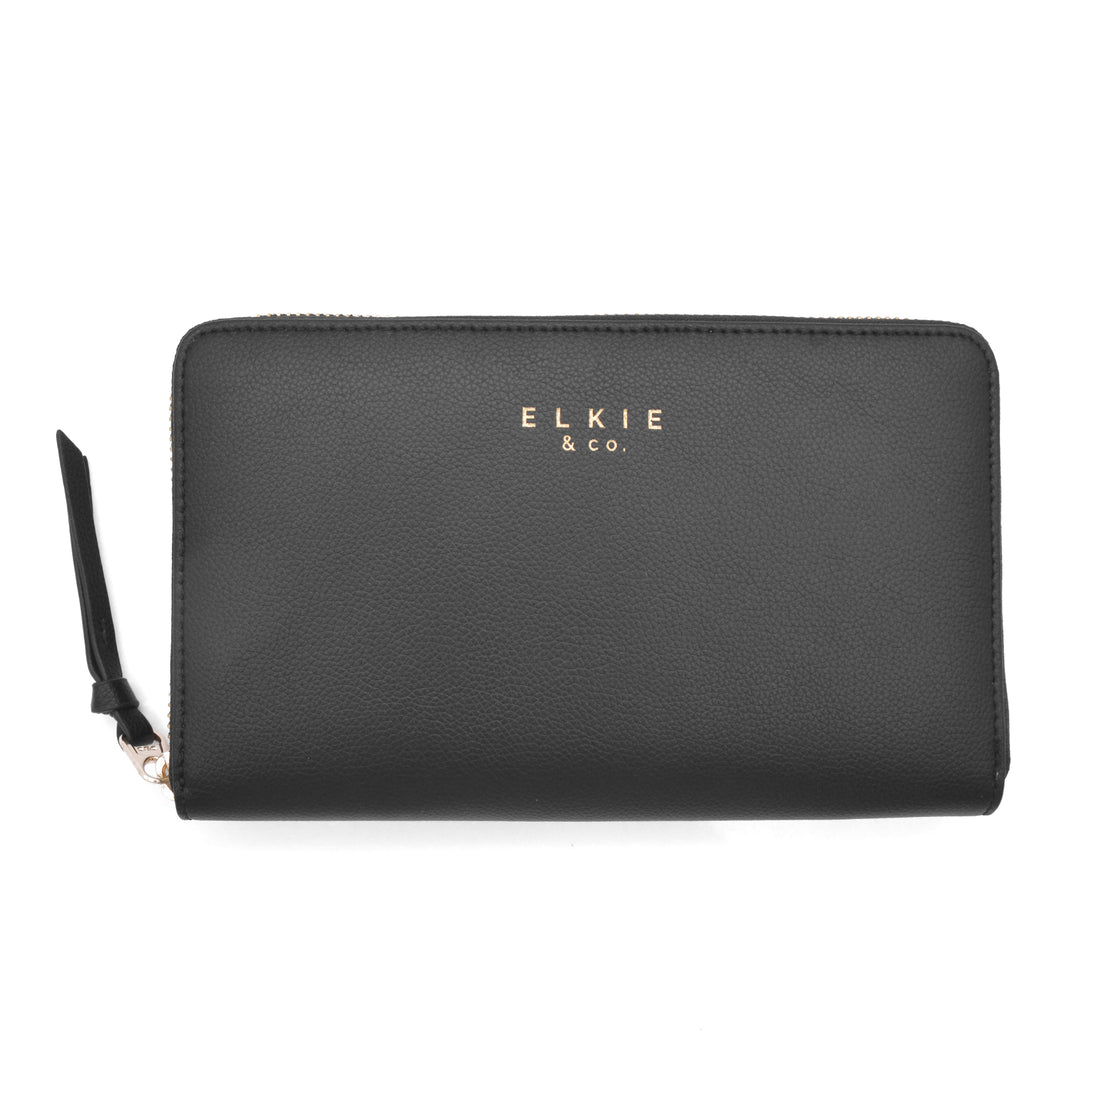 elkie ebony wallet front view on white background